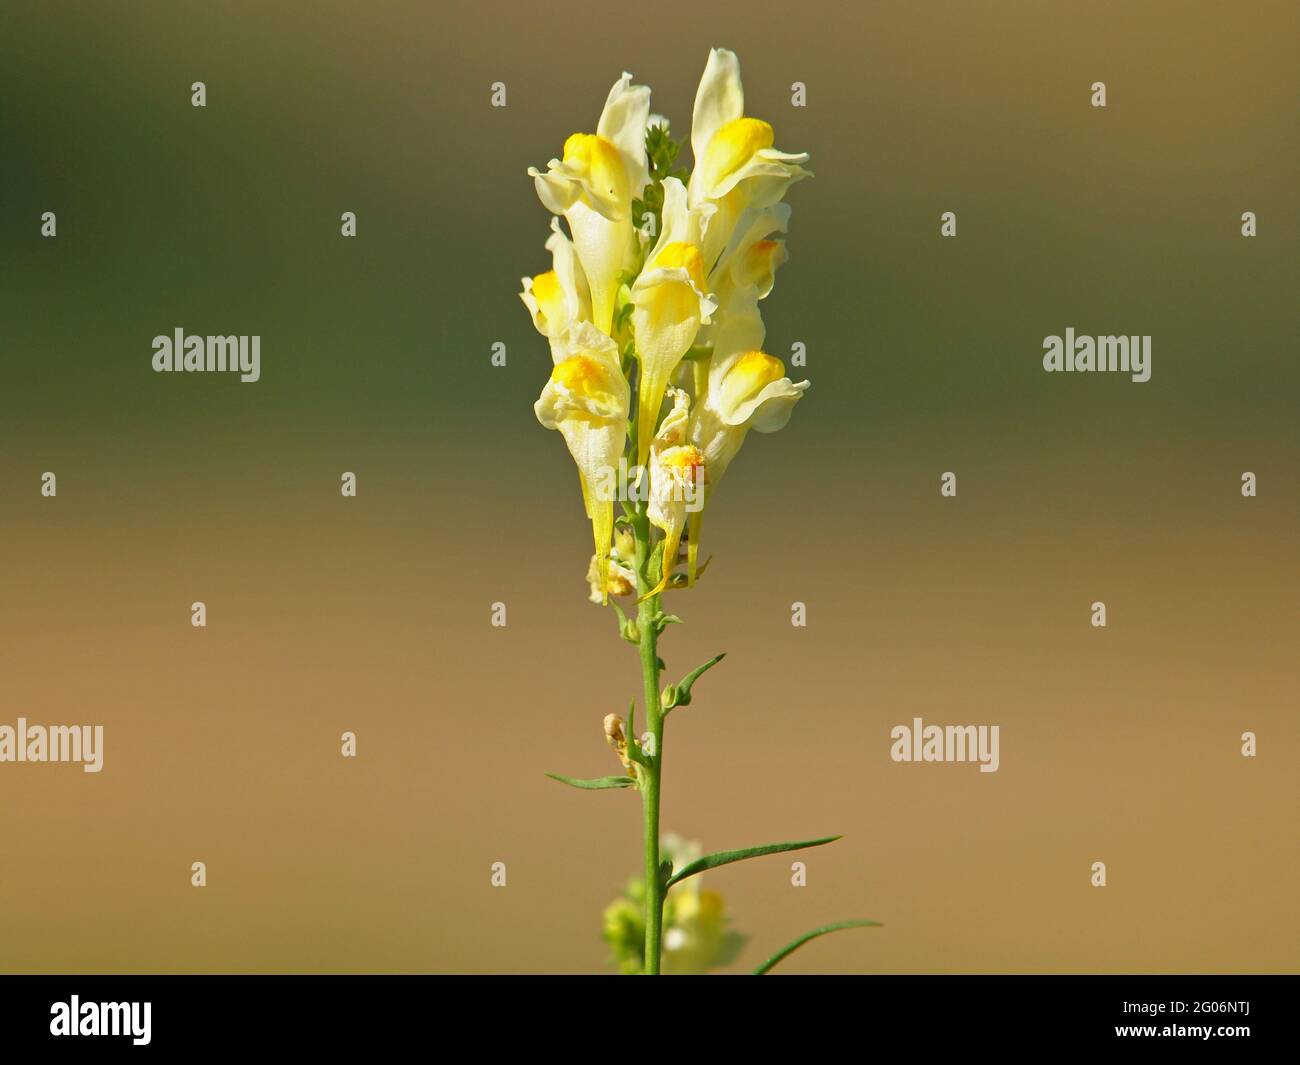 Yellow flower of toadflax or butter-and-eggs, Linaria vulgaris Stock Photo